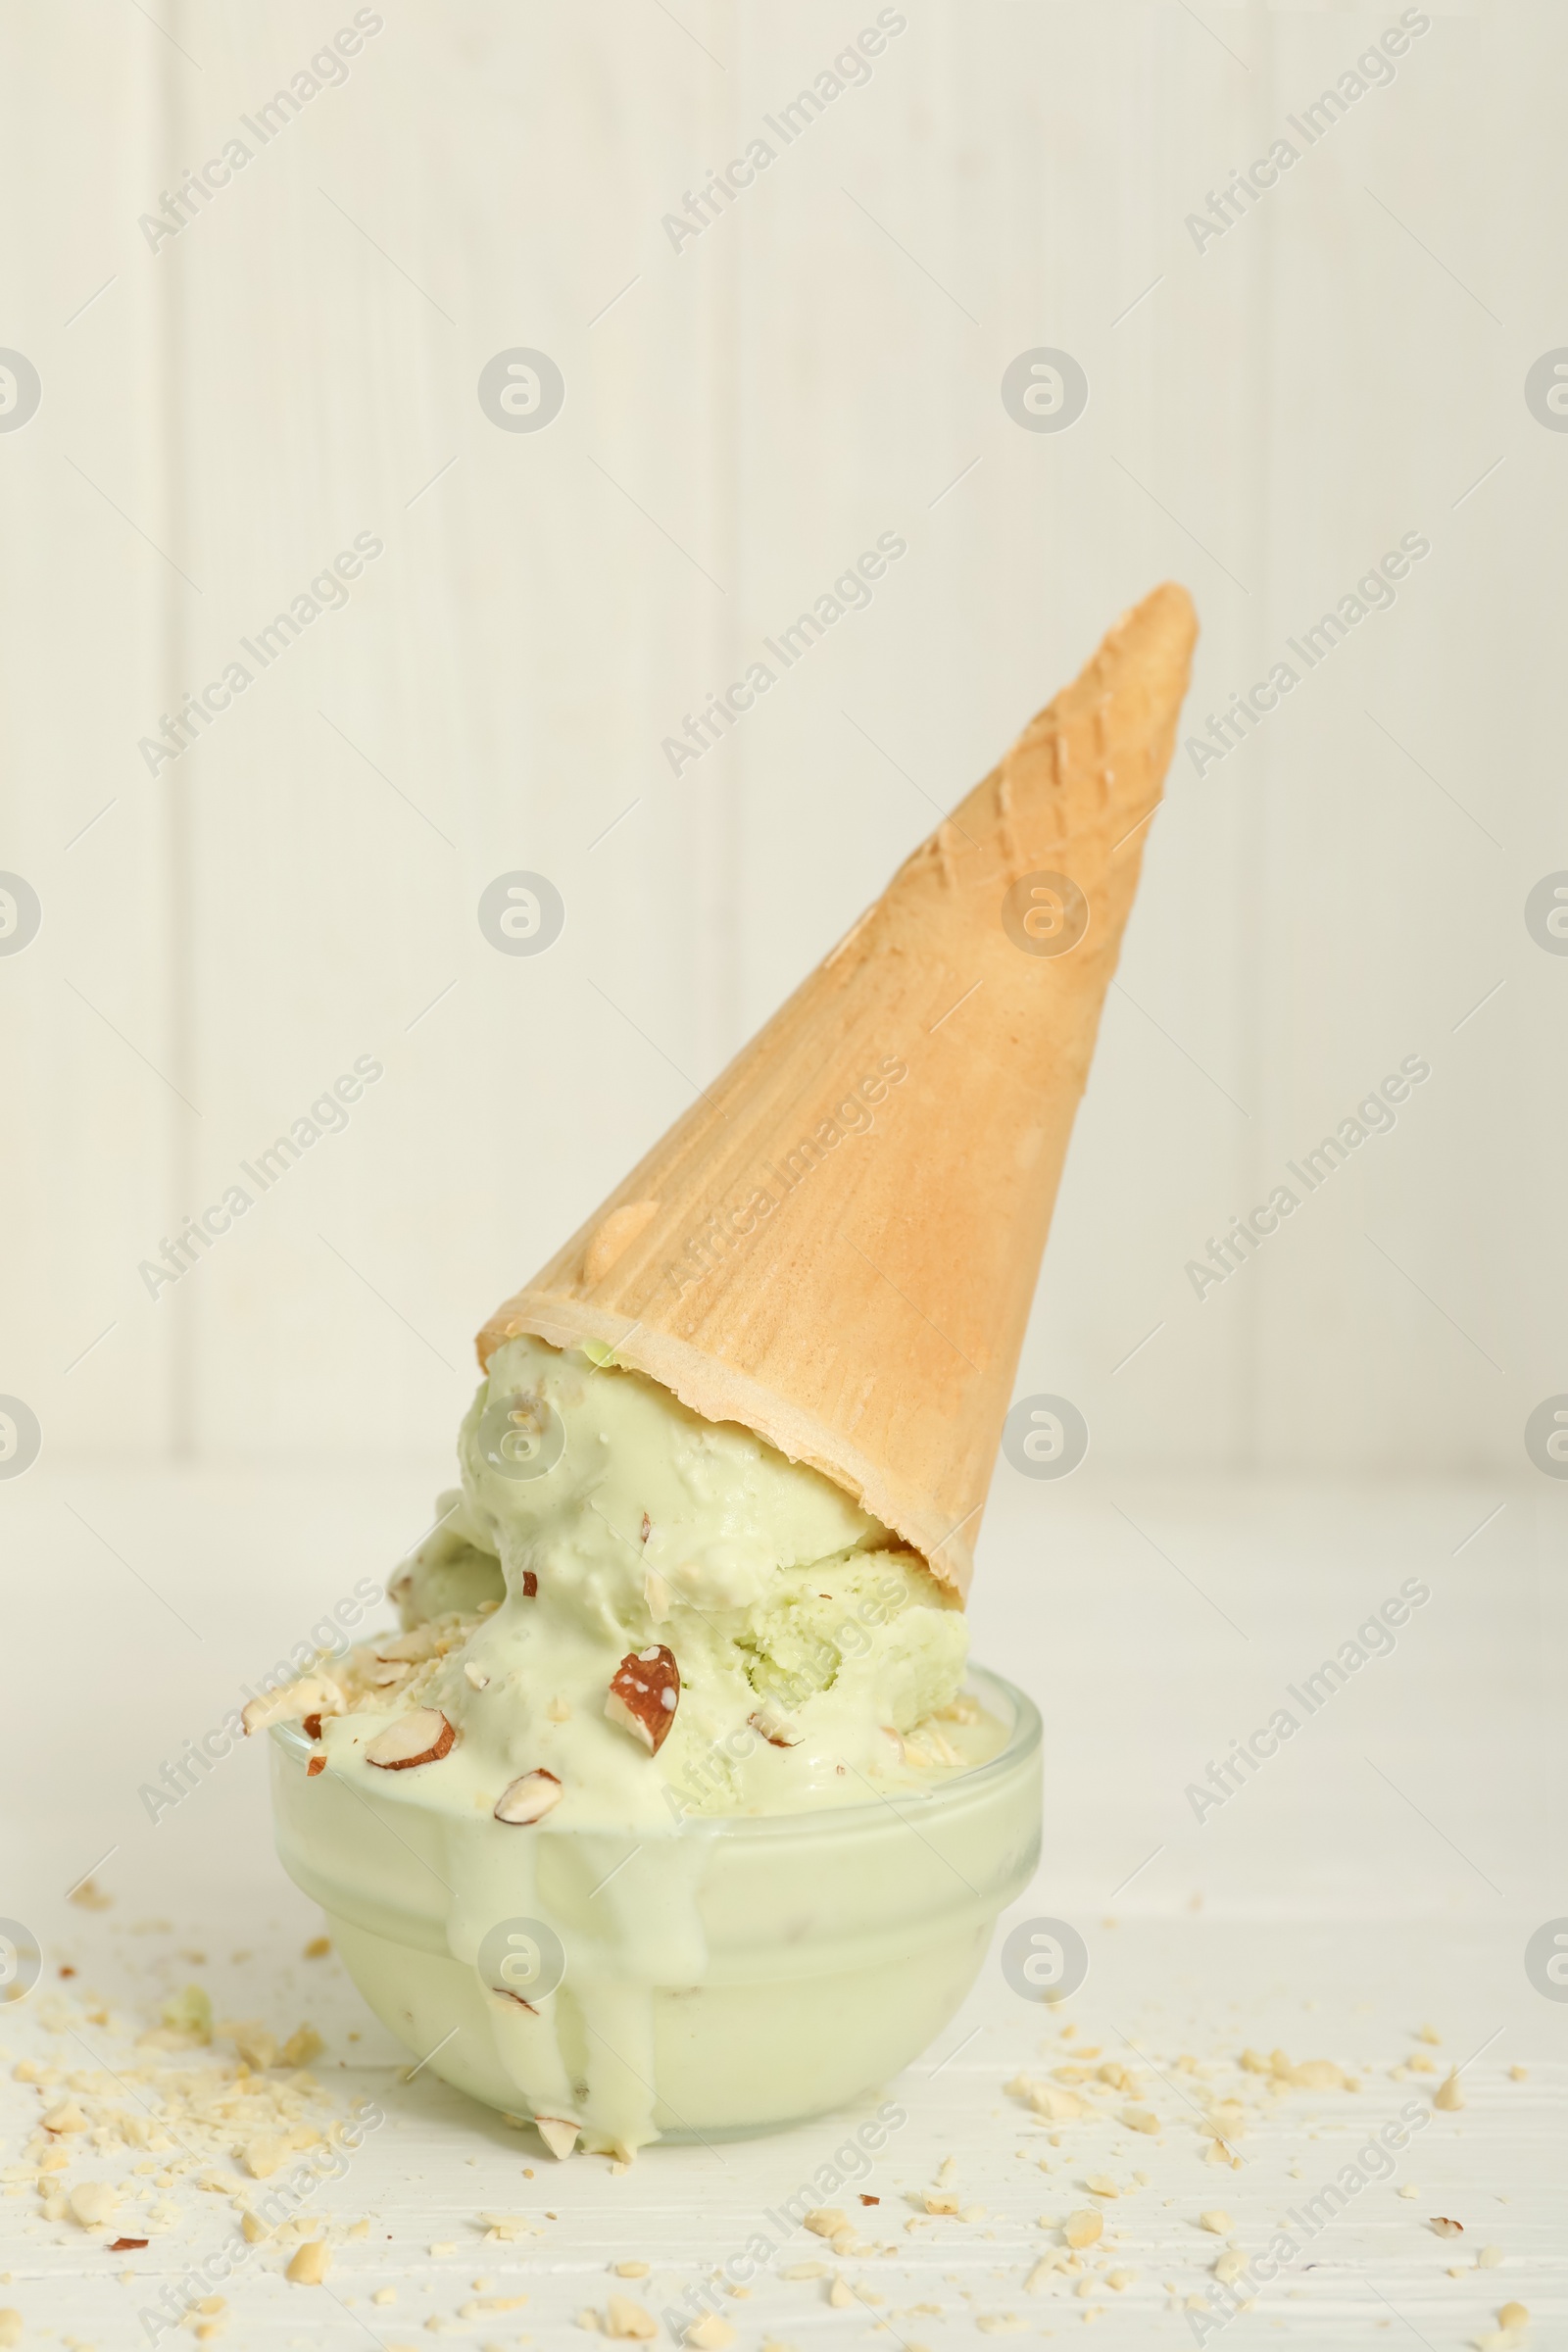 Photo of Delicious pistachio ice cream with chopped nuts in wafer cone on white wooden table